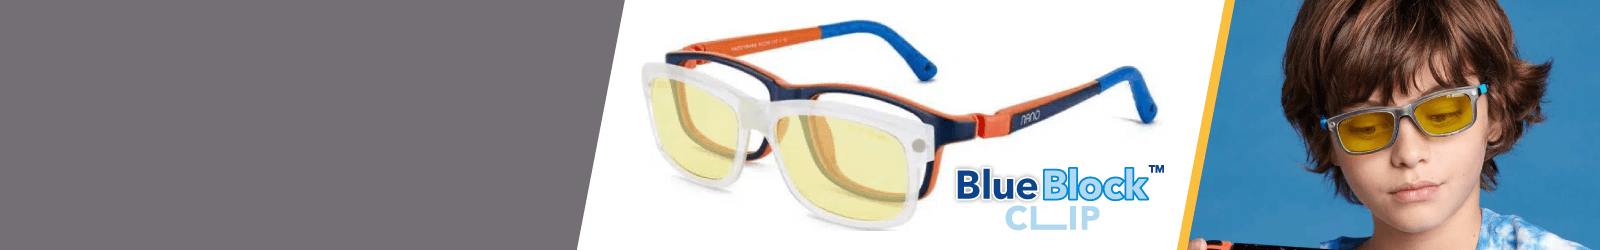 Nano Blue Block Clip Kids Sunglasses from 6 to 8-year-old